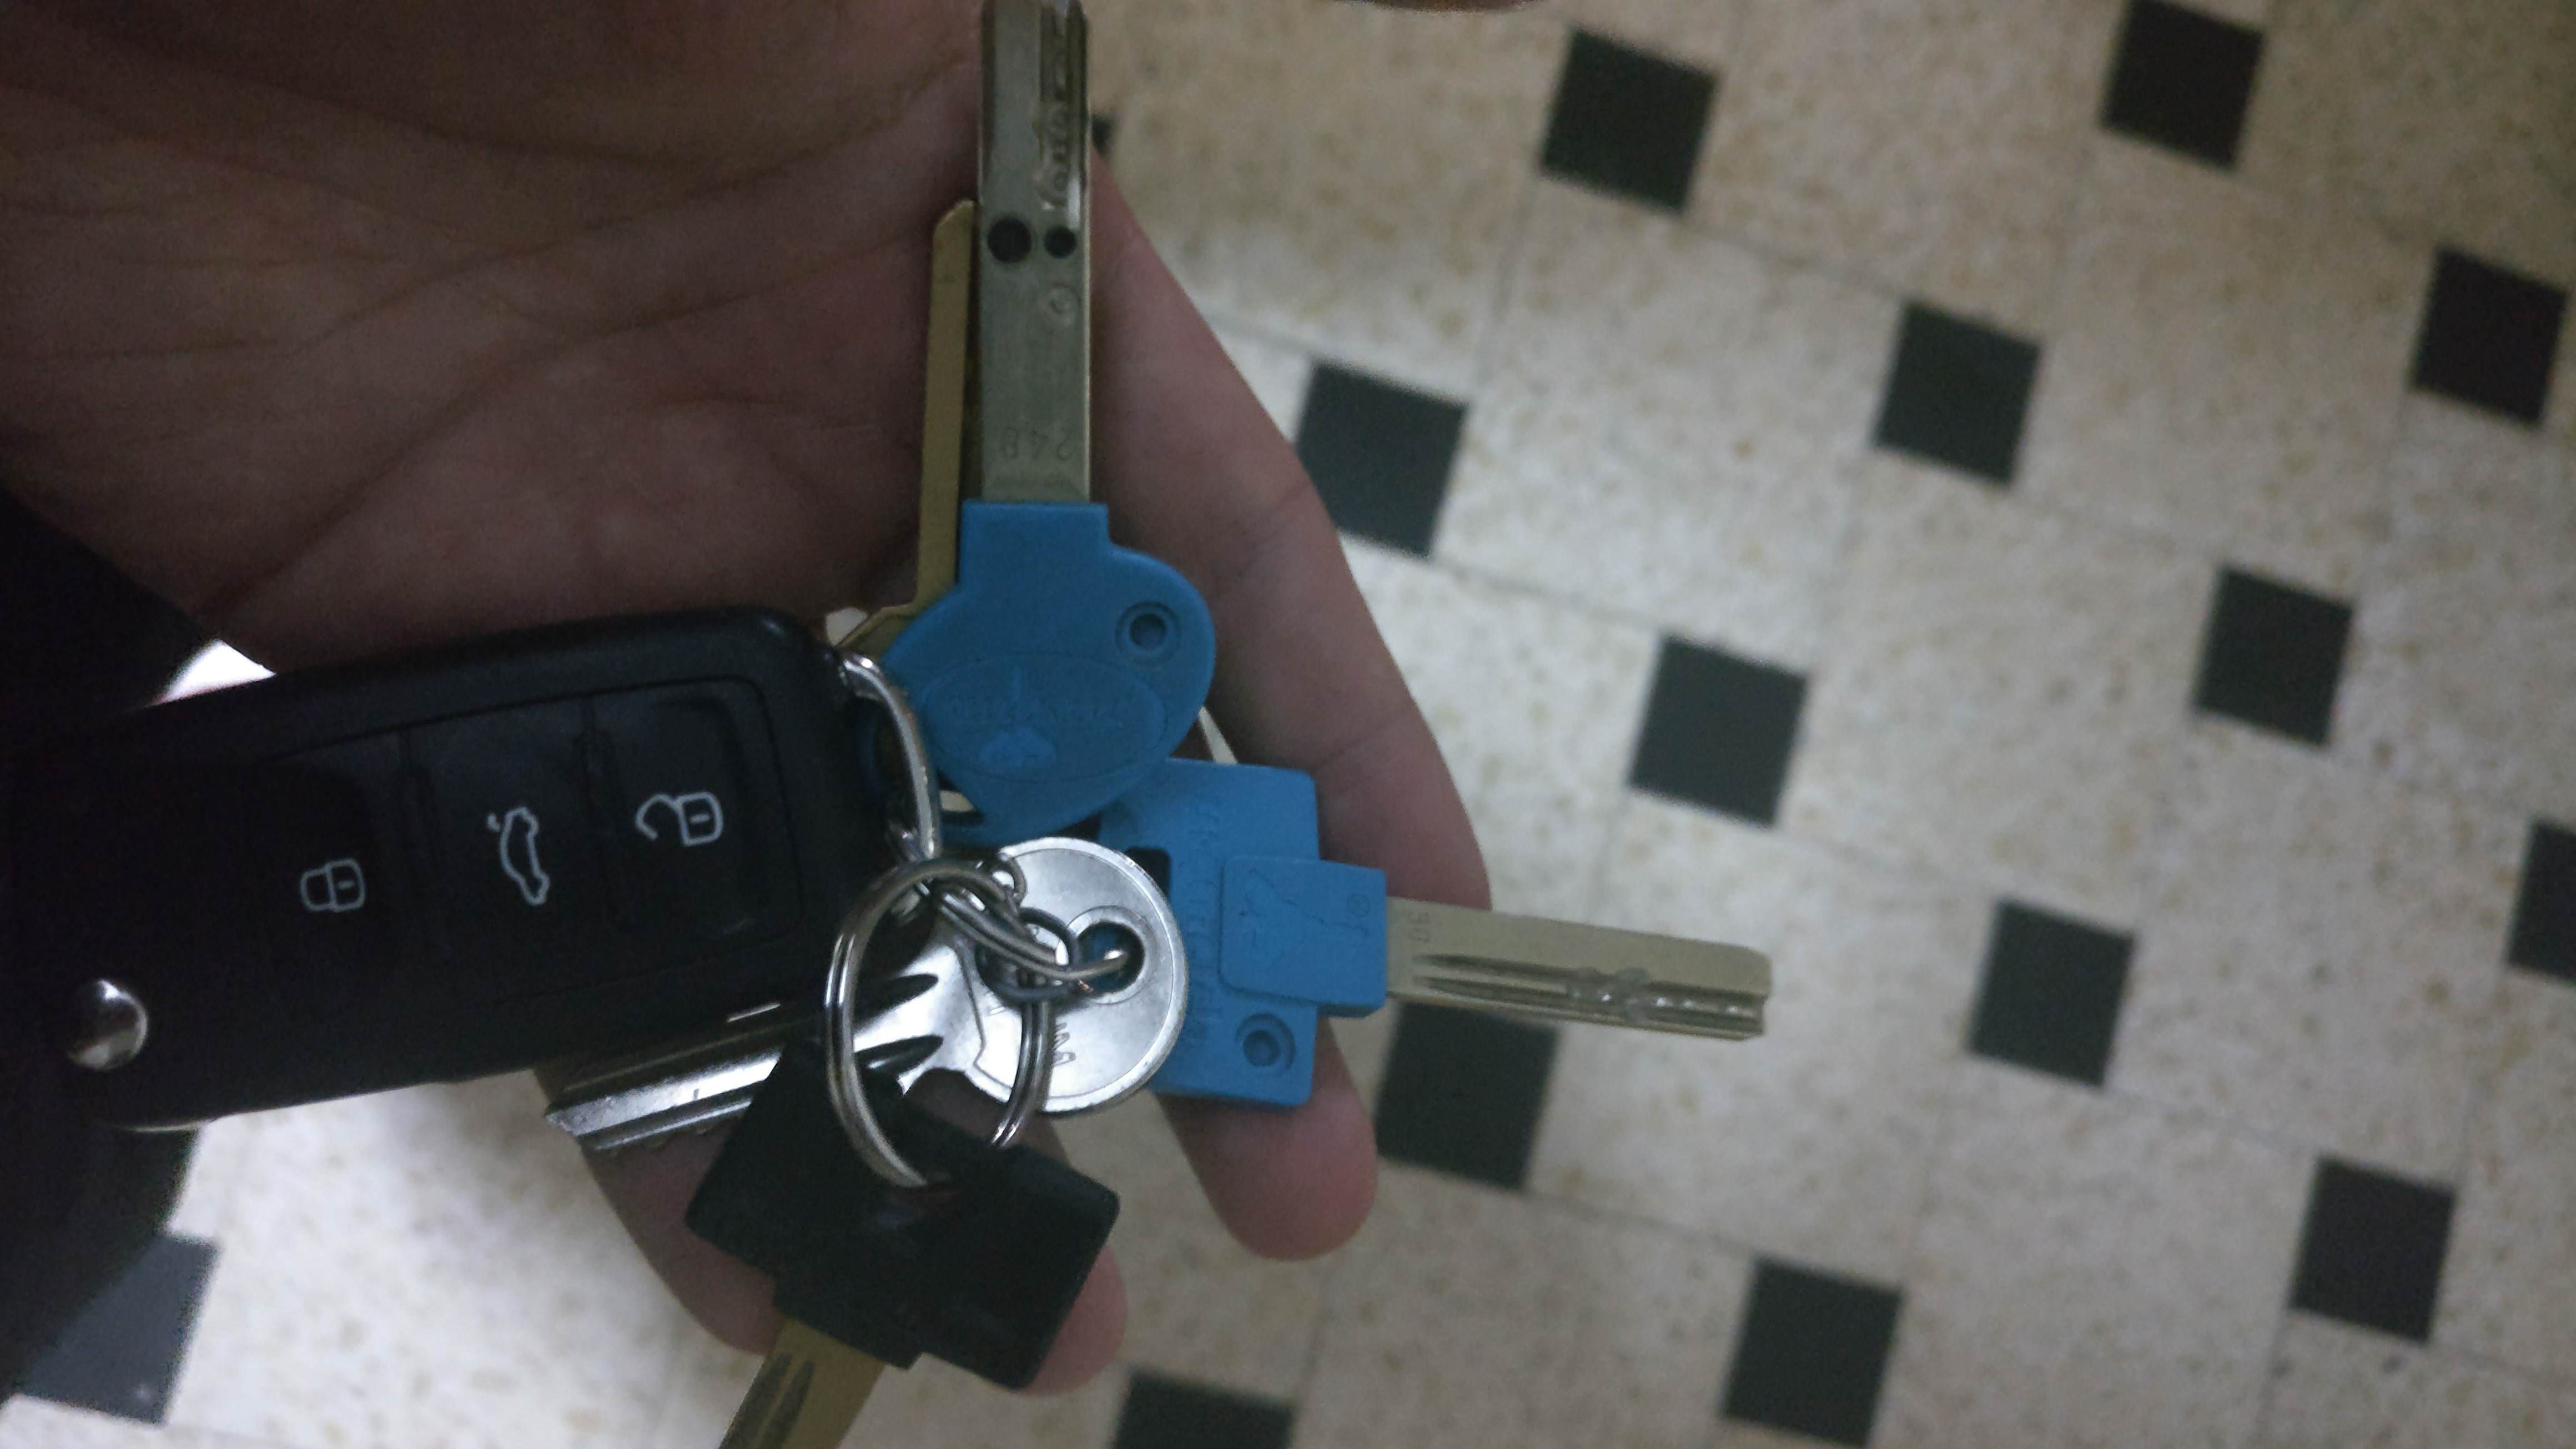 My color-blind friend gave me his keys and said the blue one is for the building door and the orange is for the apartment